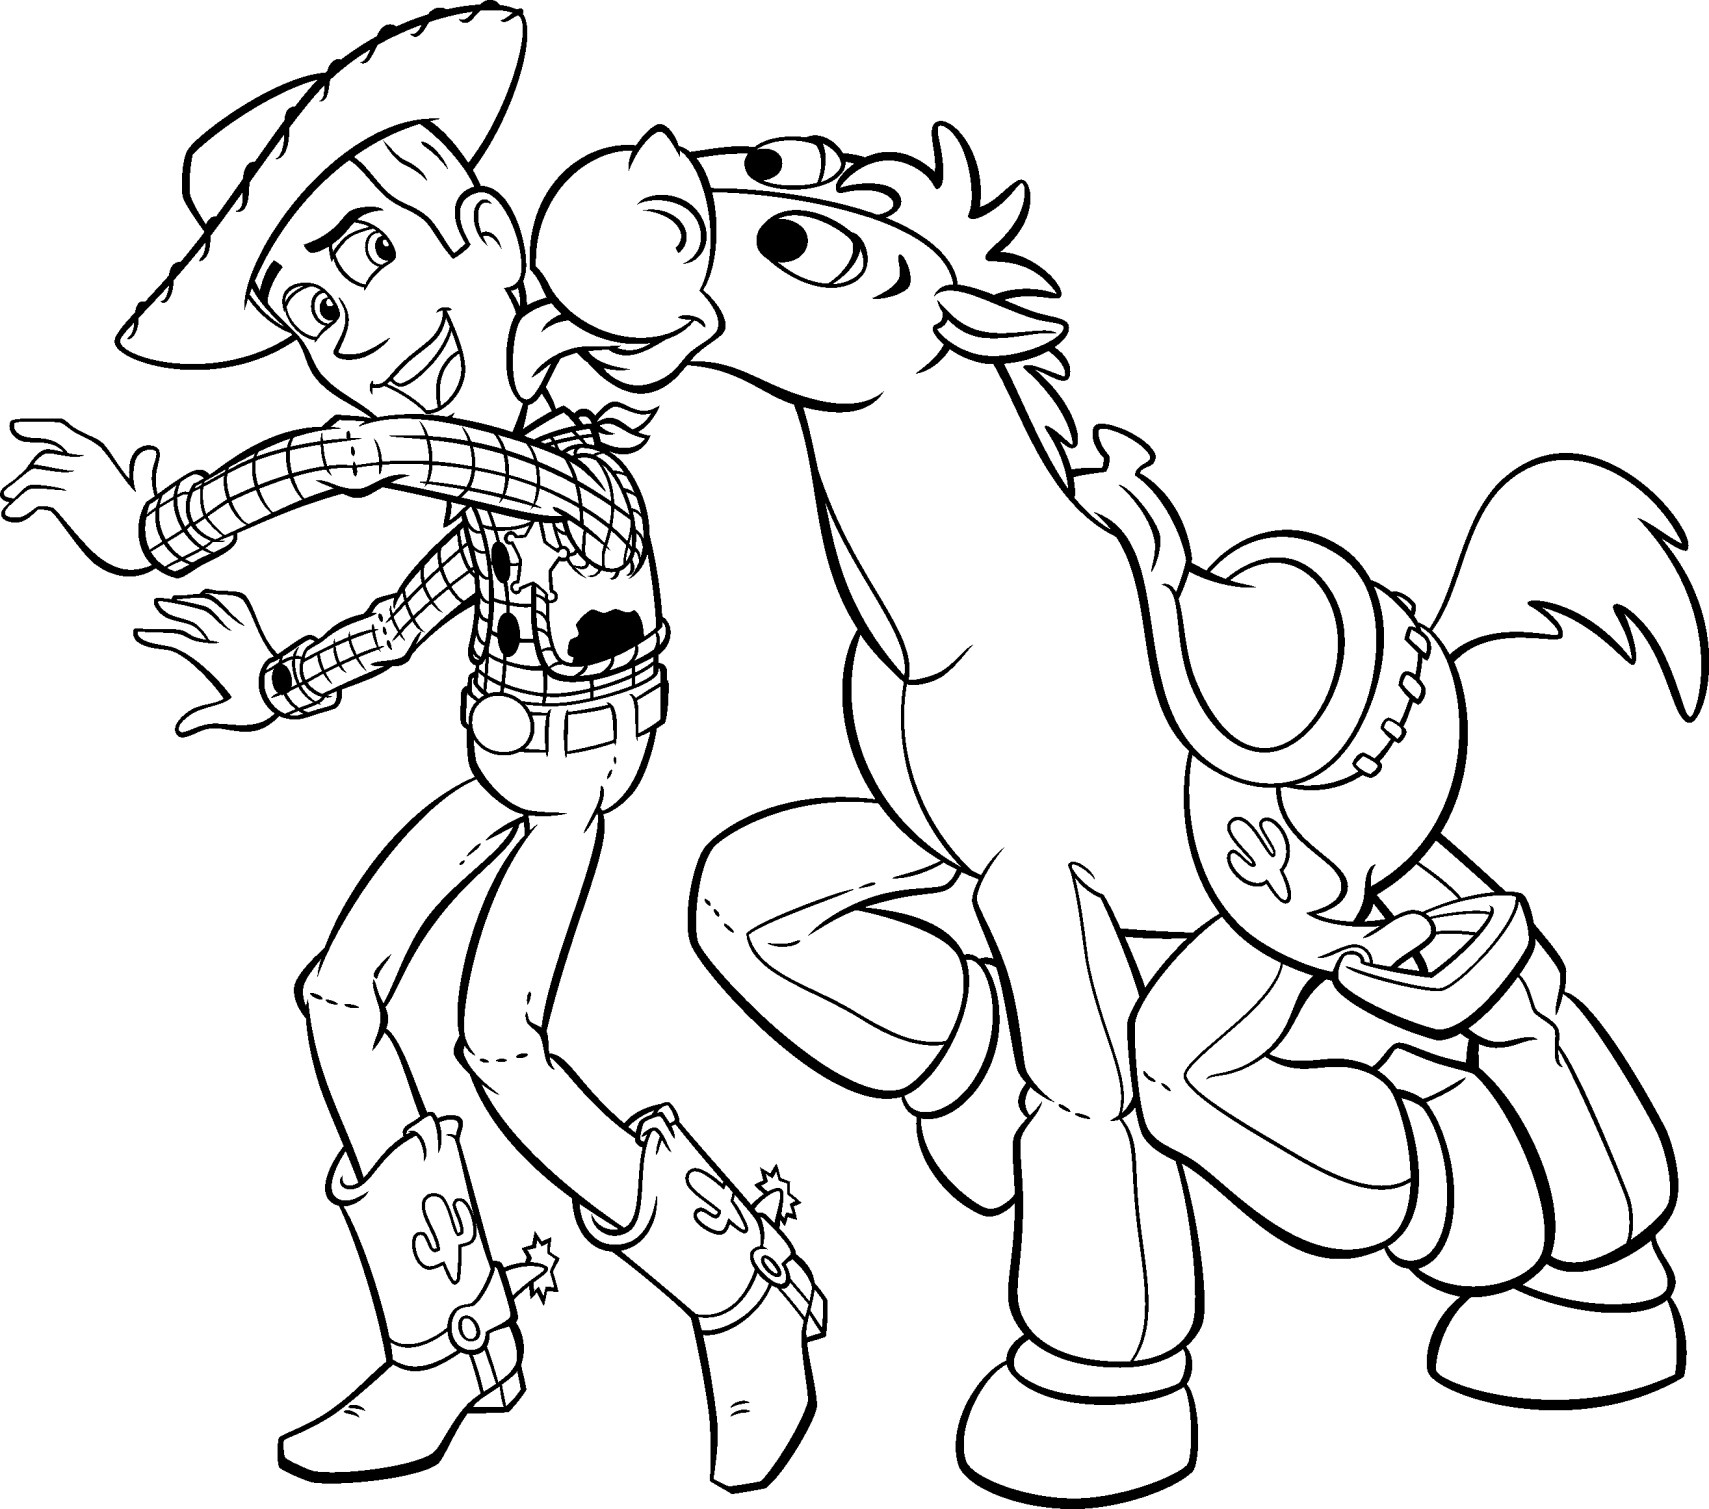 Kids Coloring Print
 Cartoon Coloring Pages 1 Coloring Kids Coloring Kids